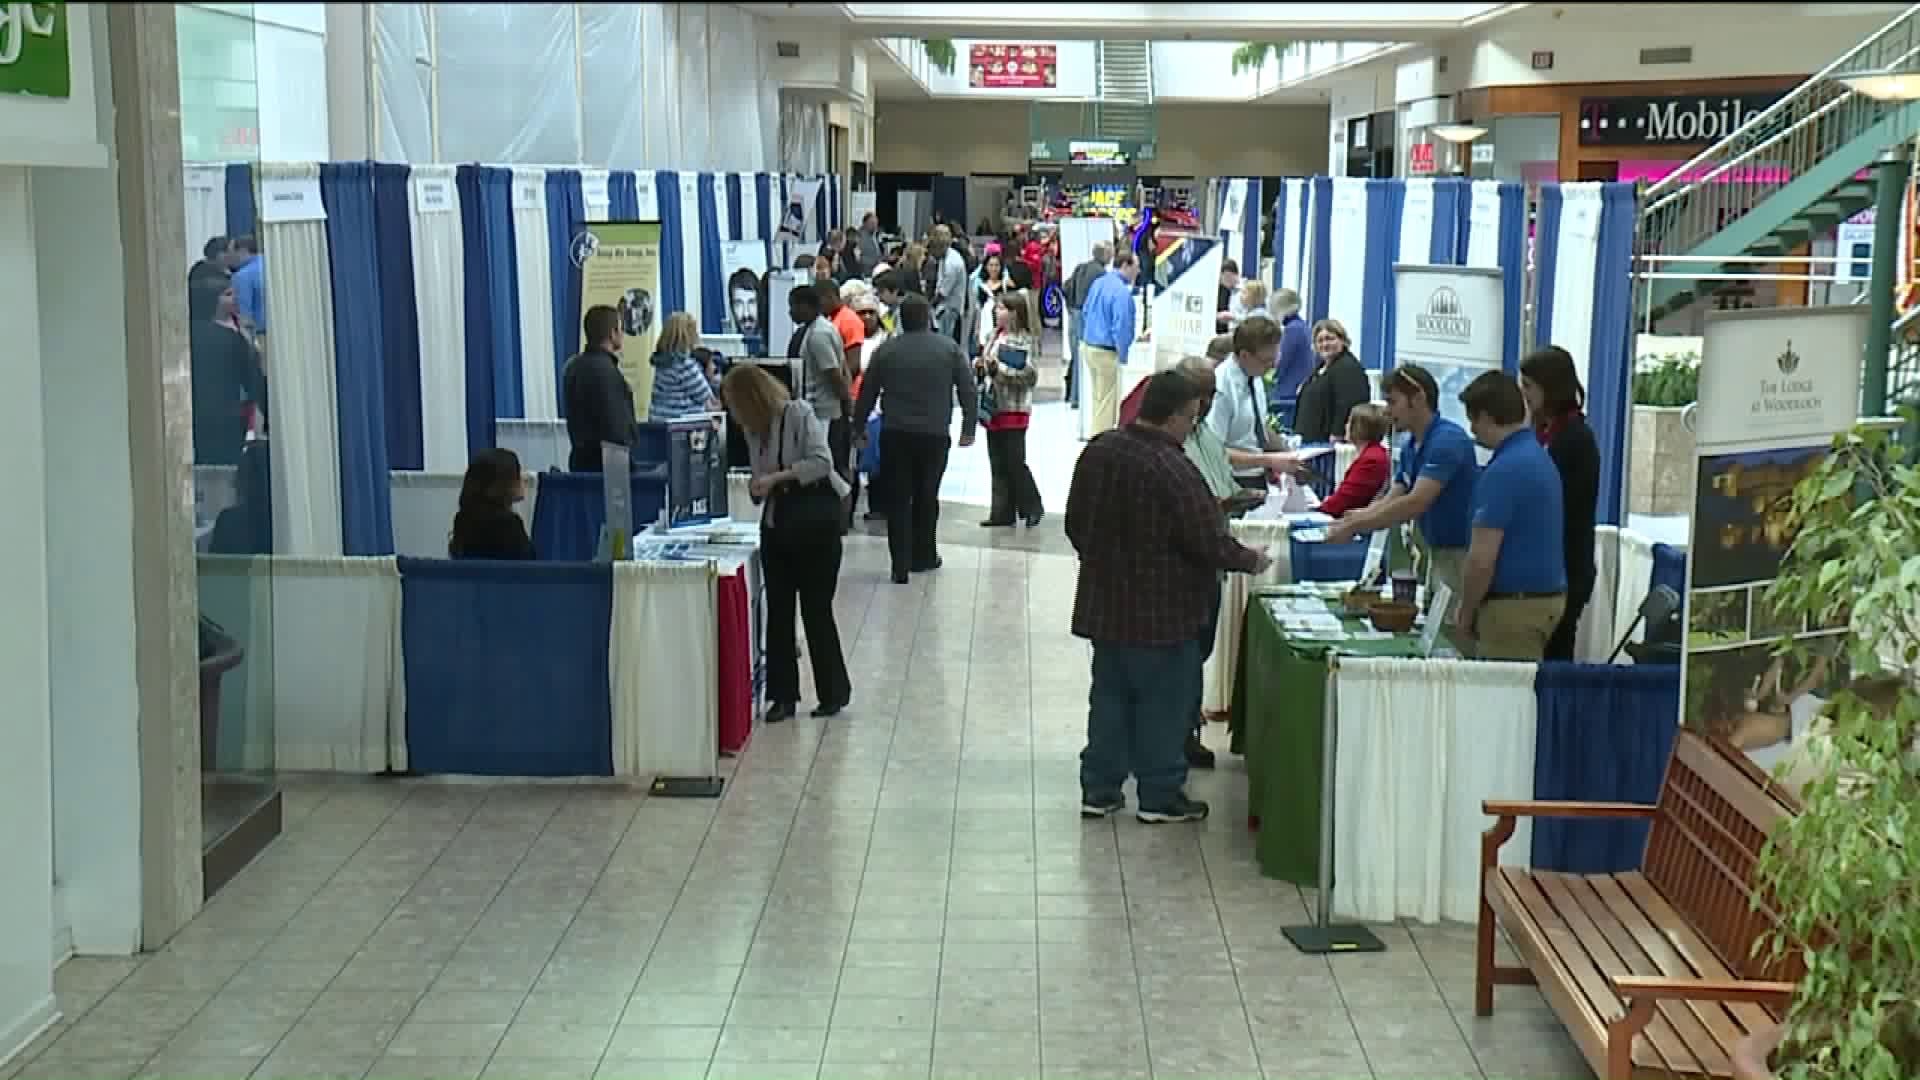 Marketplace Hosts Expo for Growing Job Market